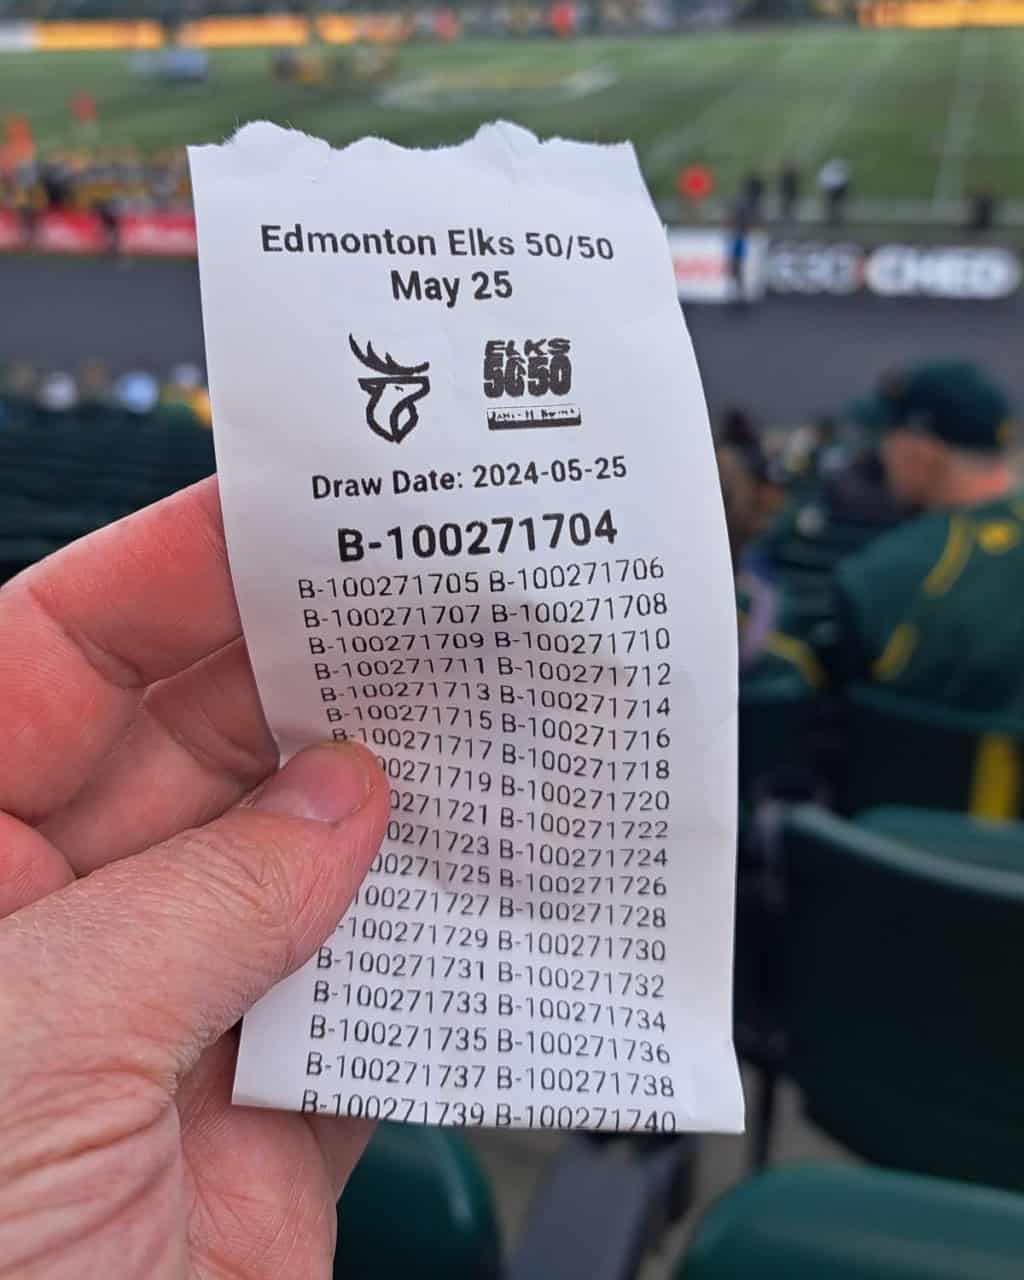 Edmonton Elks Canadian Football Game 2024-05-29 - Edmonton loves their 50-50 draws! $11,000+. Could be a year of university tuition. Or maybe a new road bike. One with electronic shifters. Lady luck wasn't on my side this time :(
